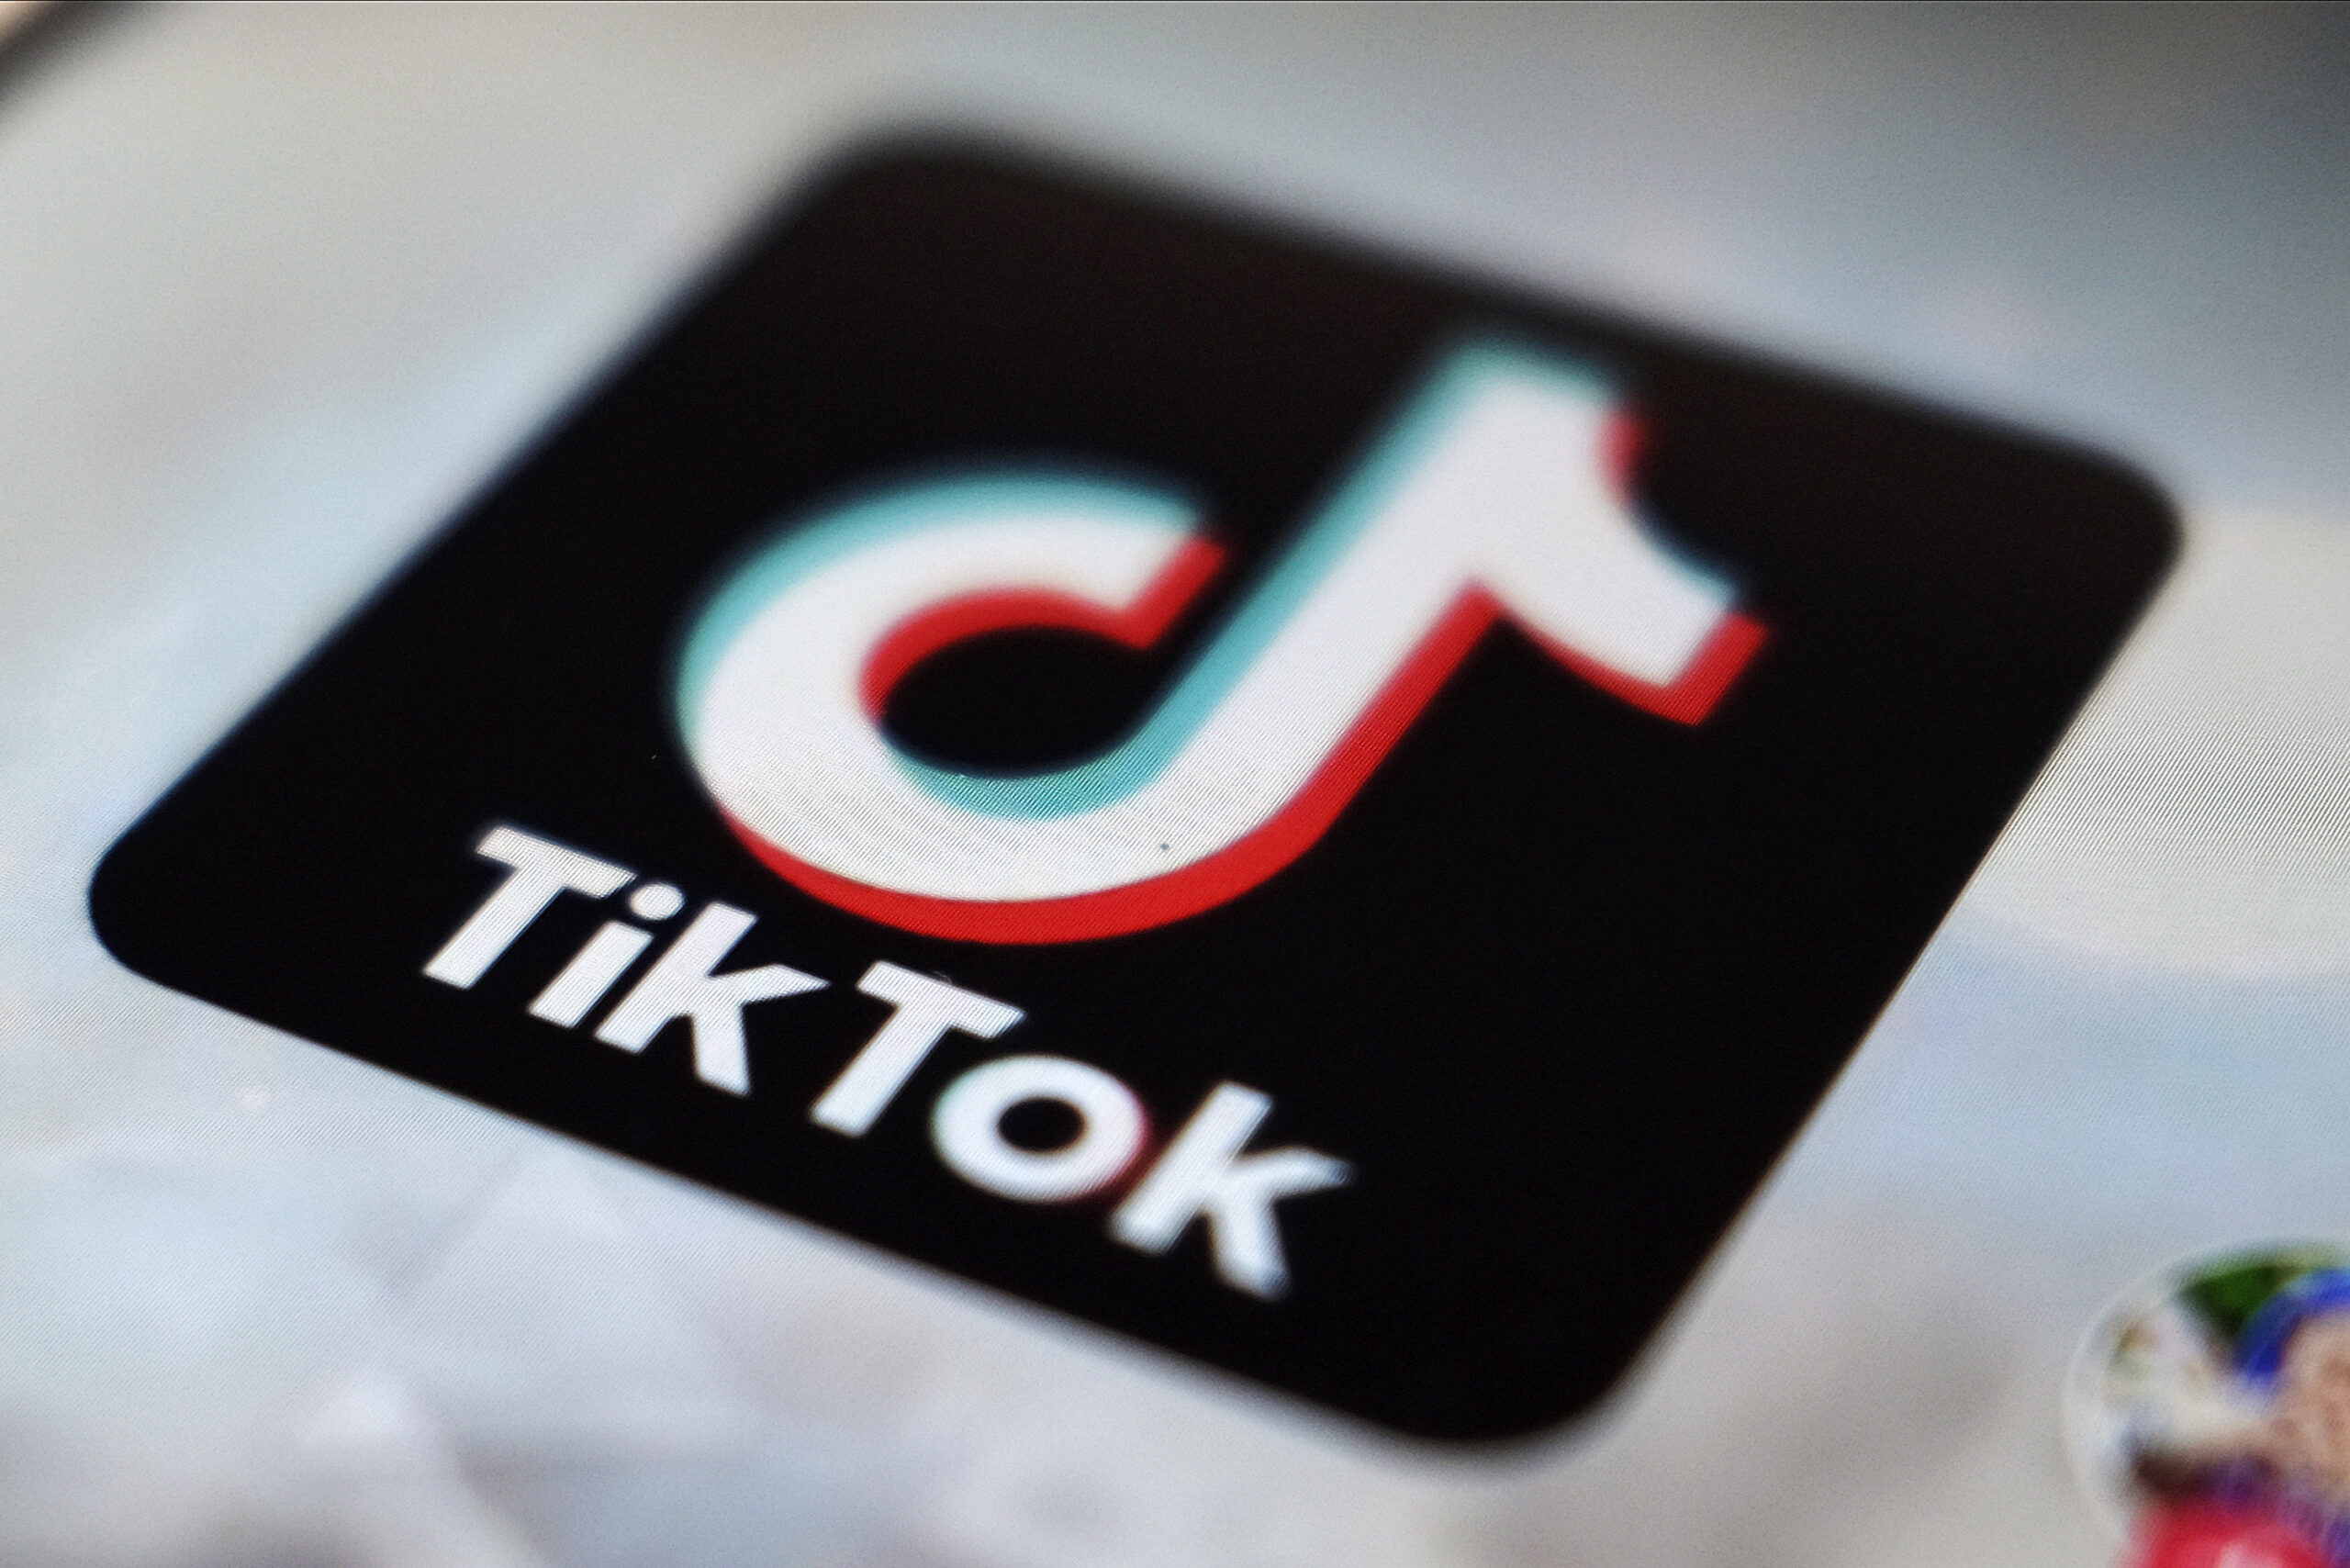 TikTok, known in China as Douyin, is a video-sharing social networking service owned by Chinese company ByteDance.